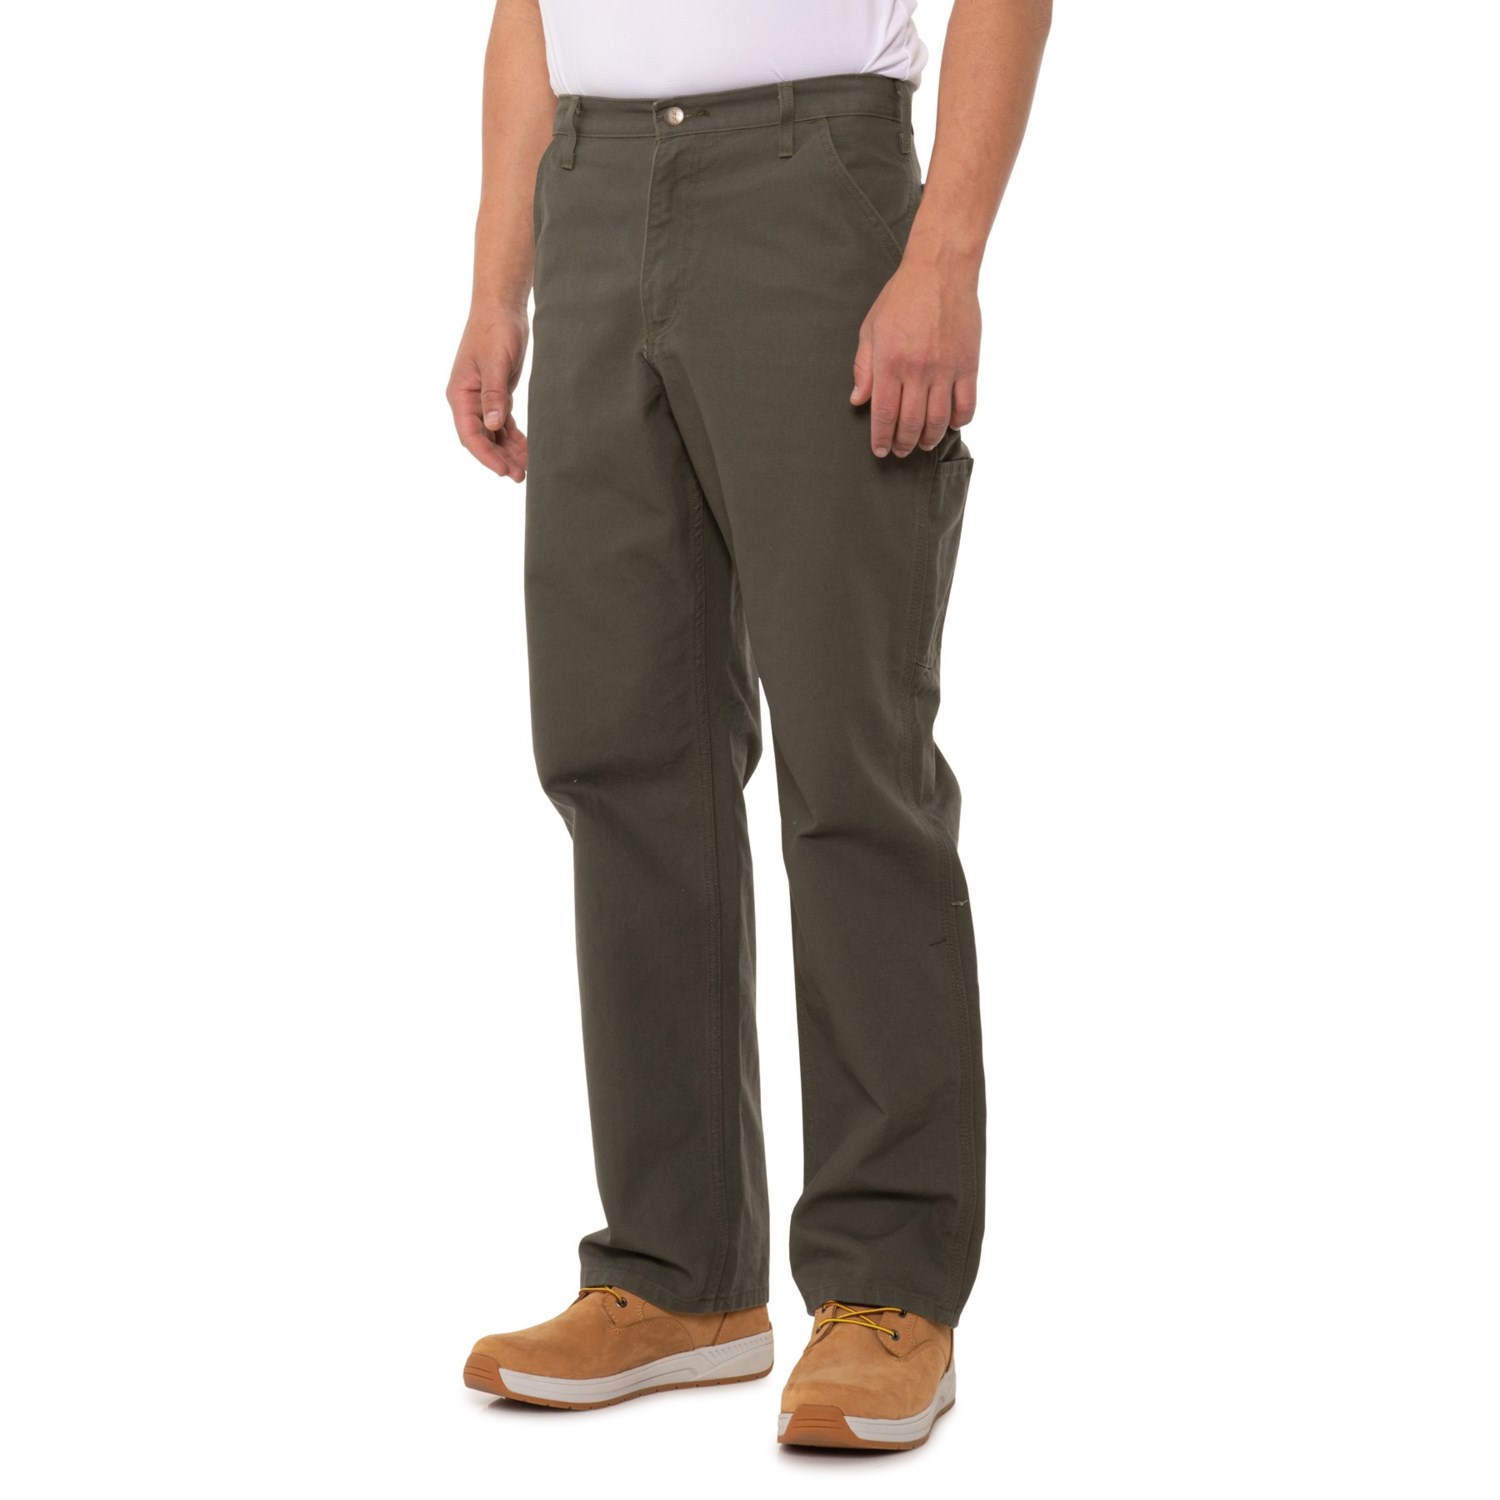 Carhartt B11 Big and Tall Washed Duck Utility Work Pants (For Men)